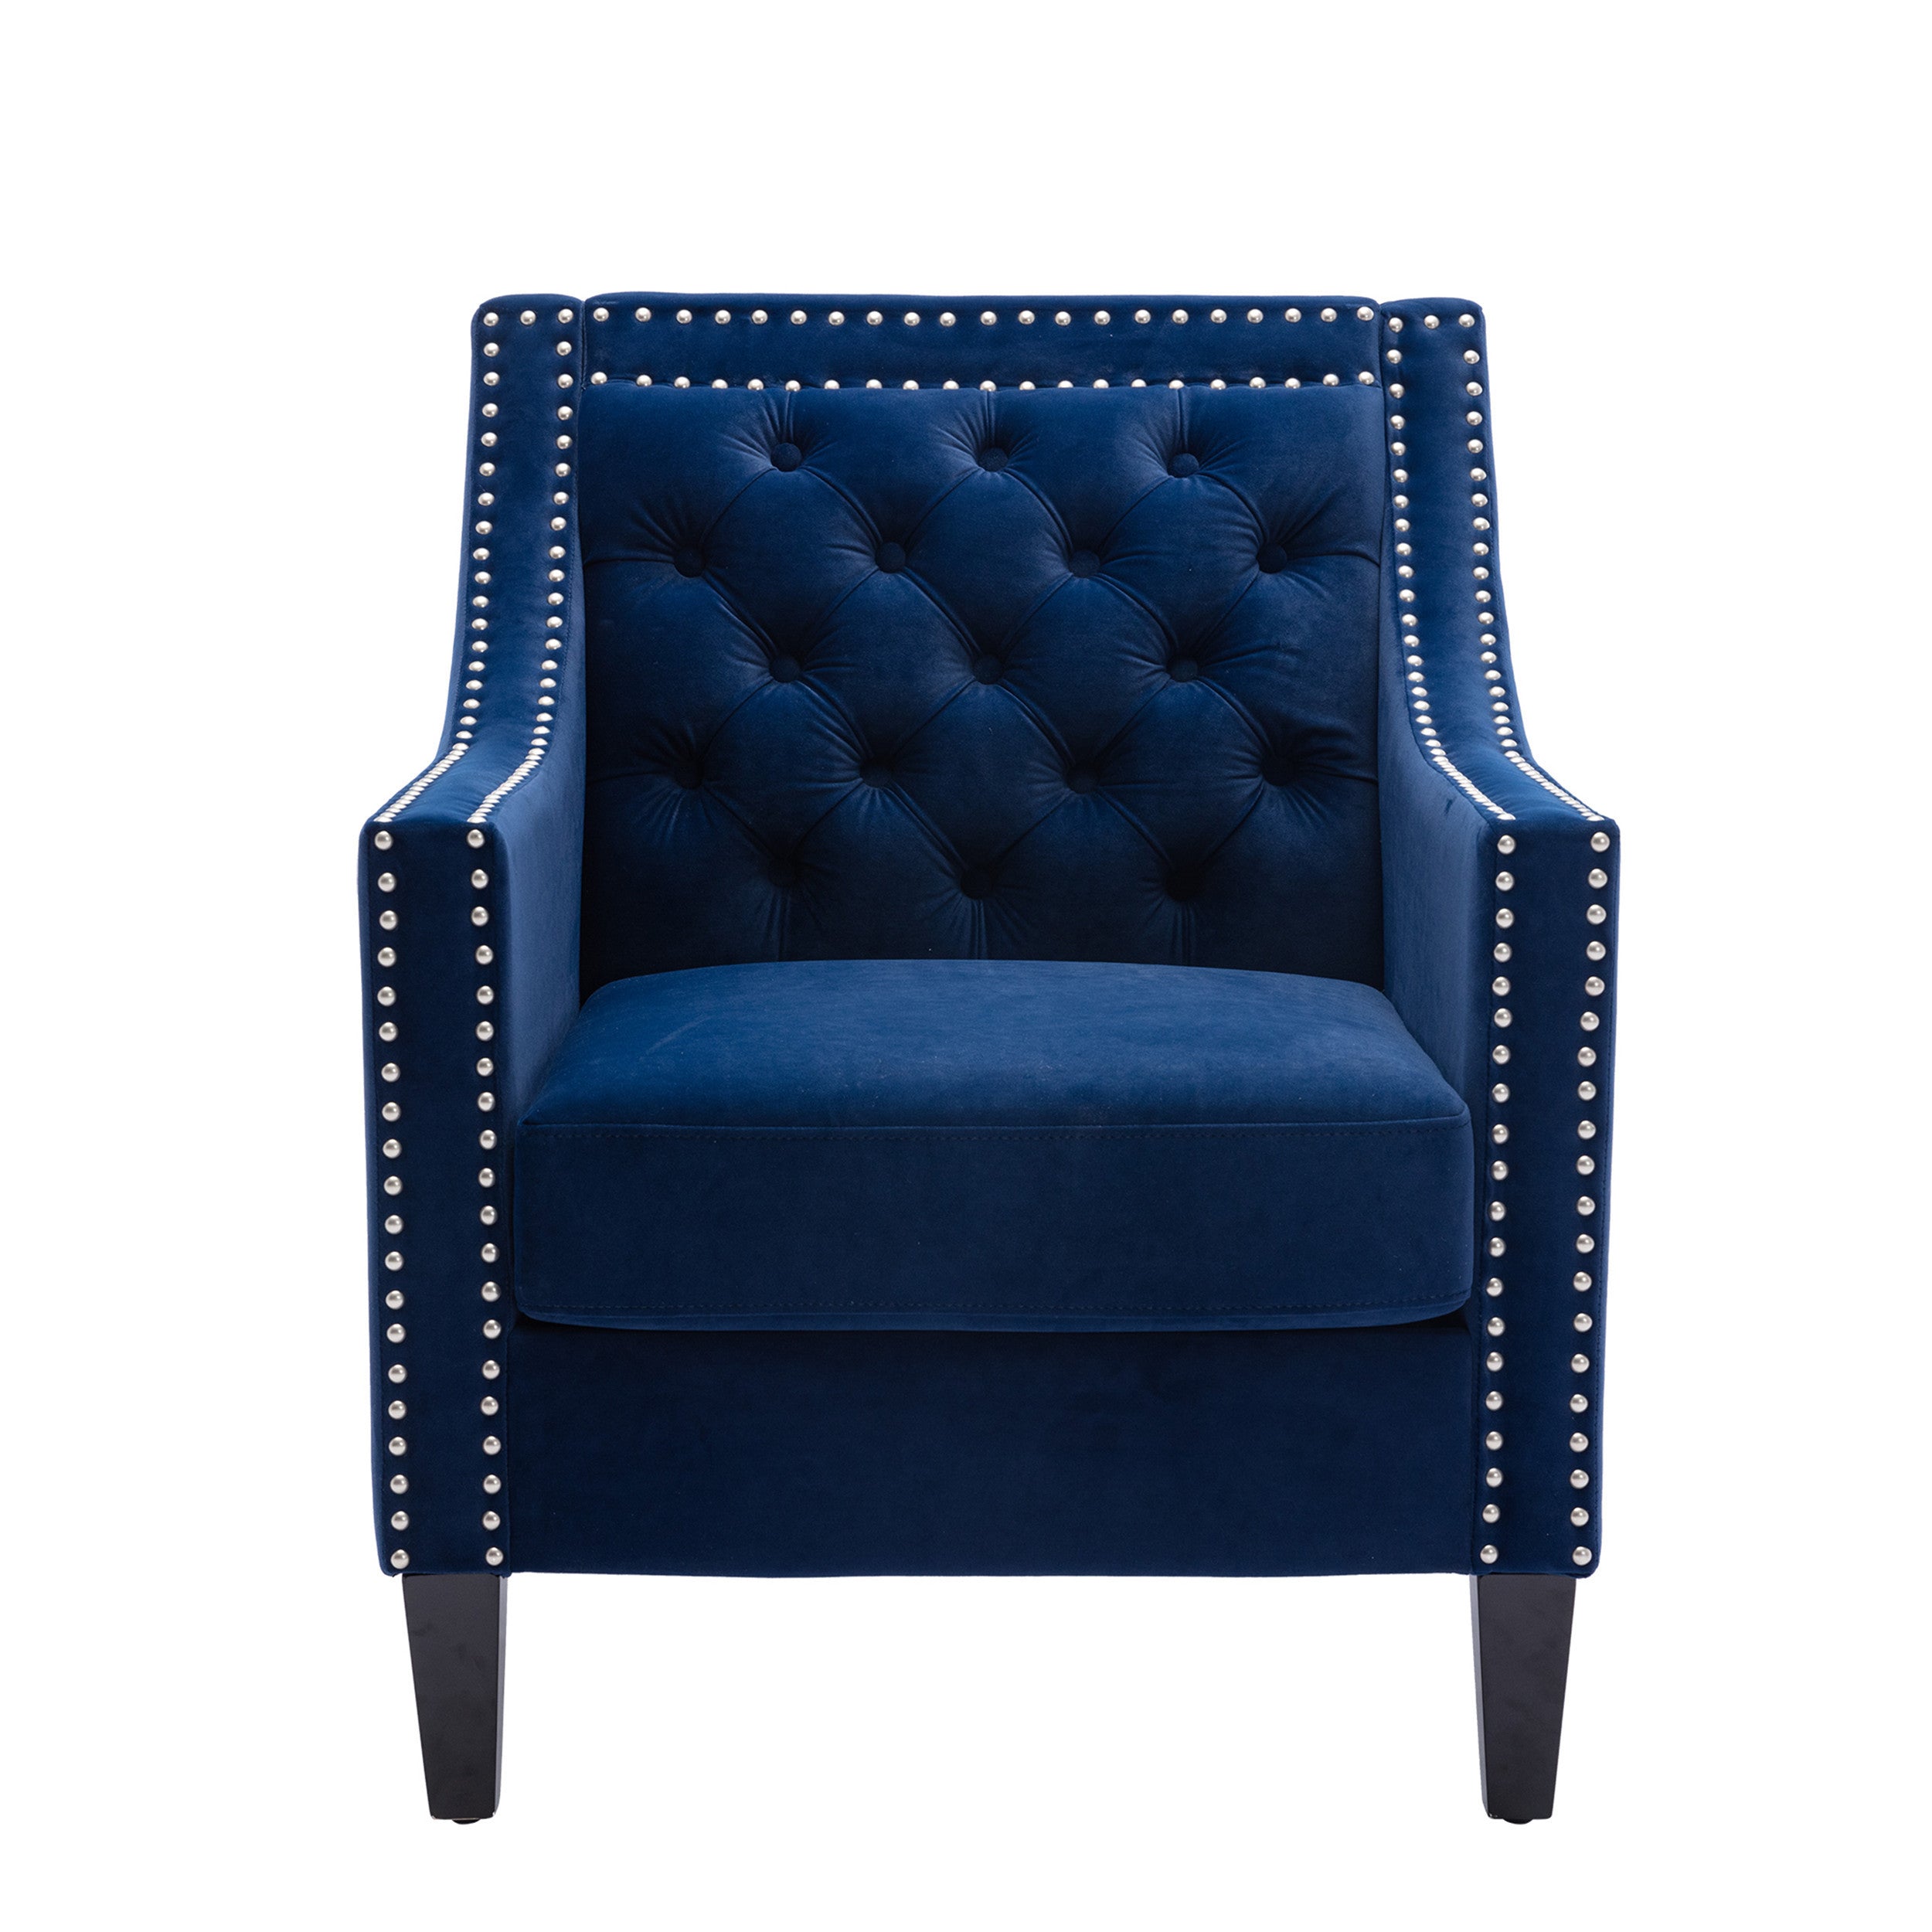 Vegas Navy Blue Velvet Accent Chair With Tufted Back and Nailhead Trim